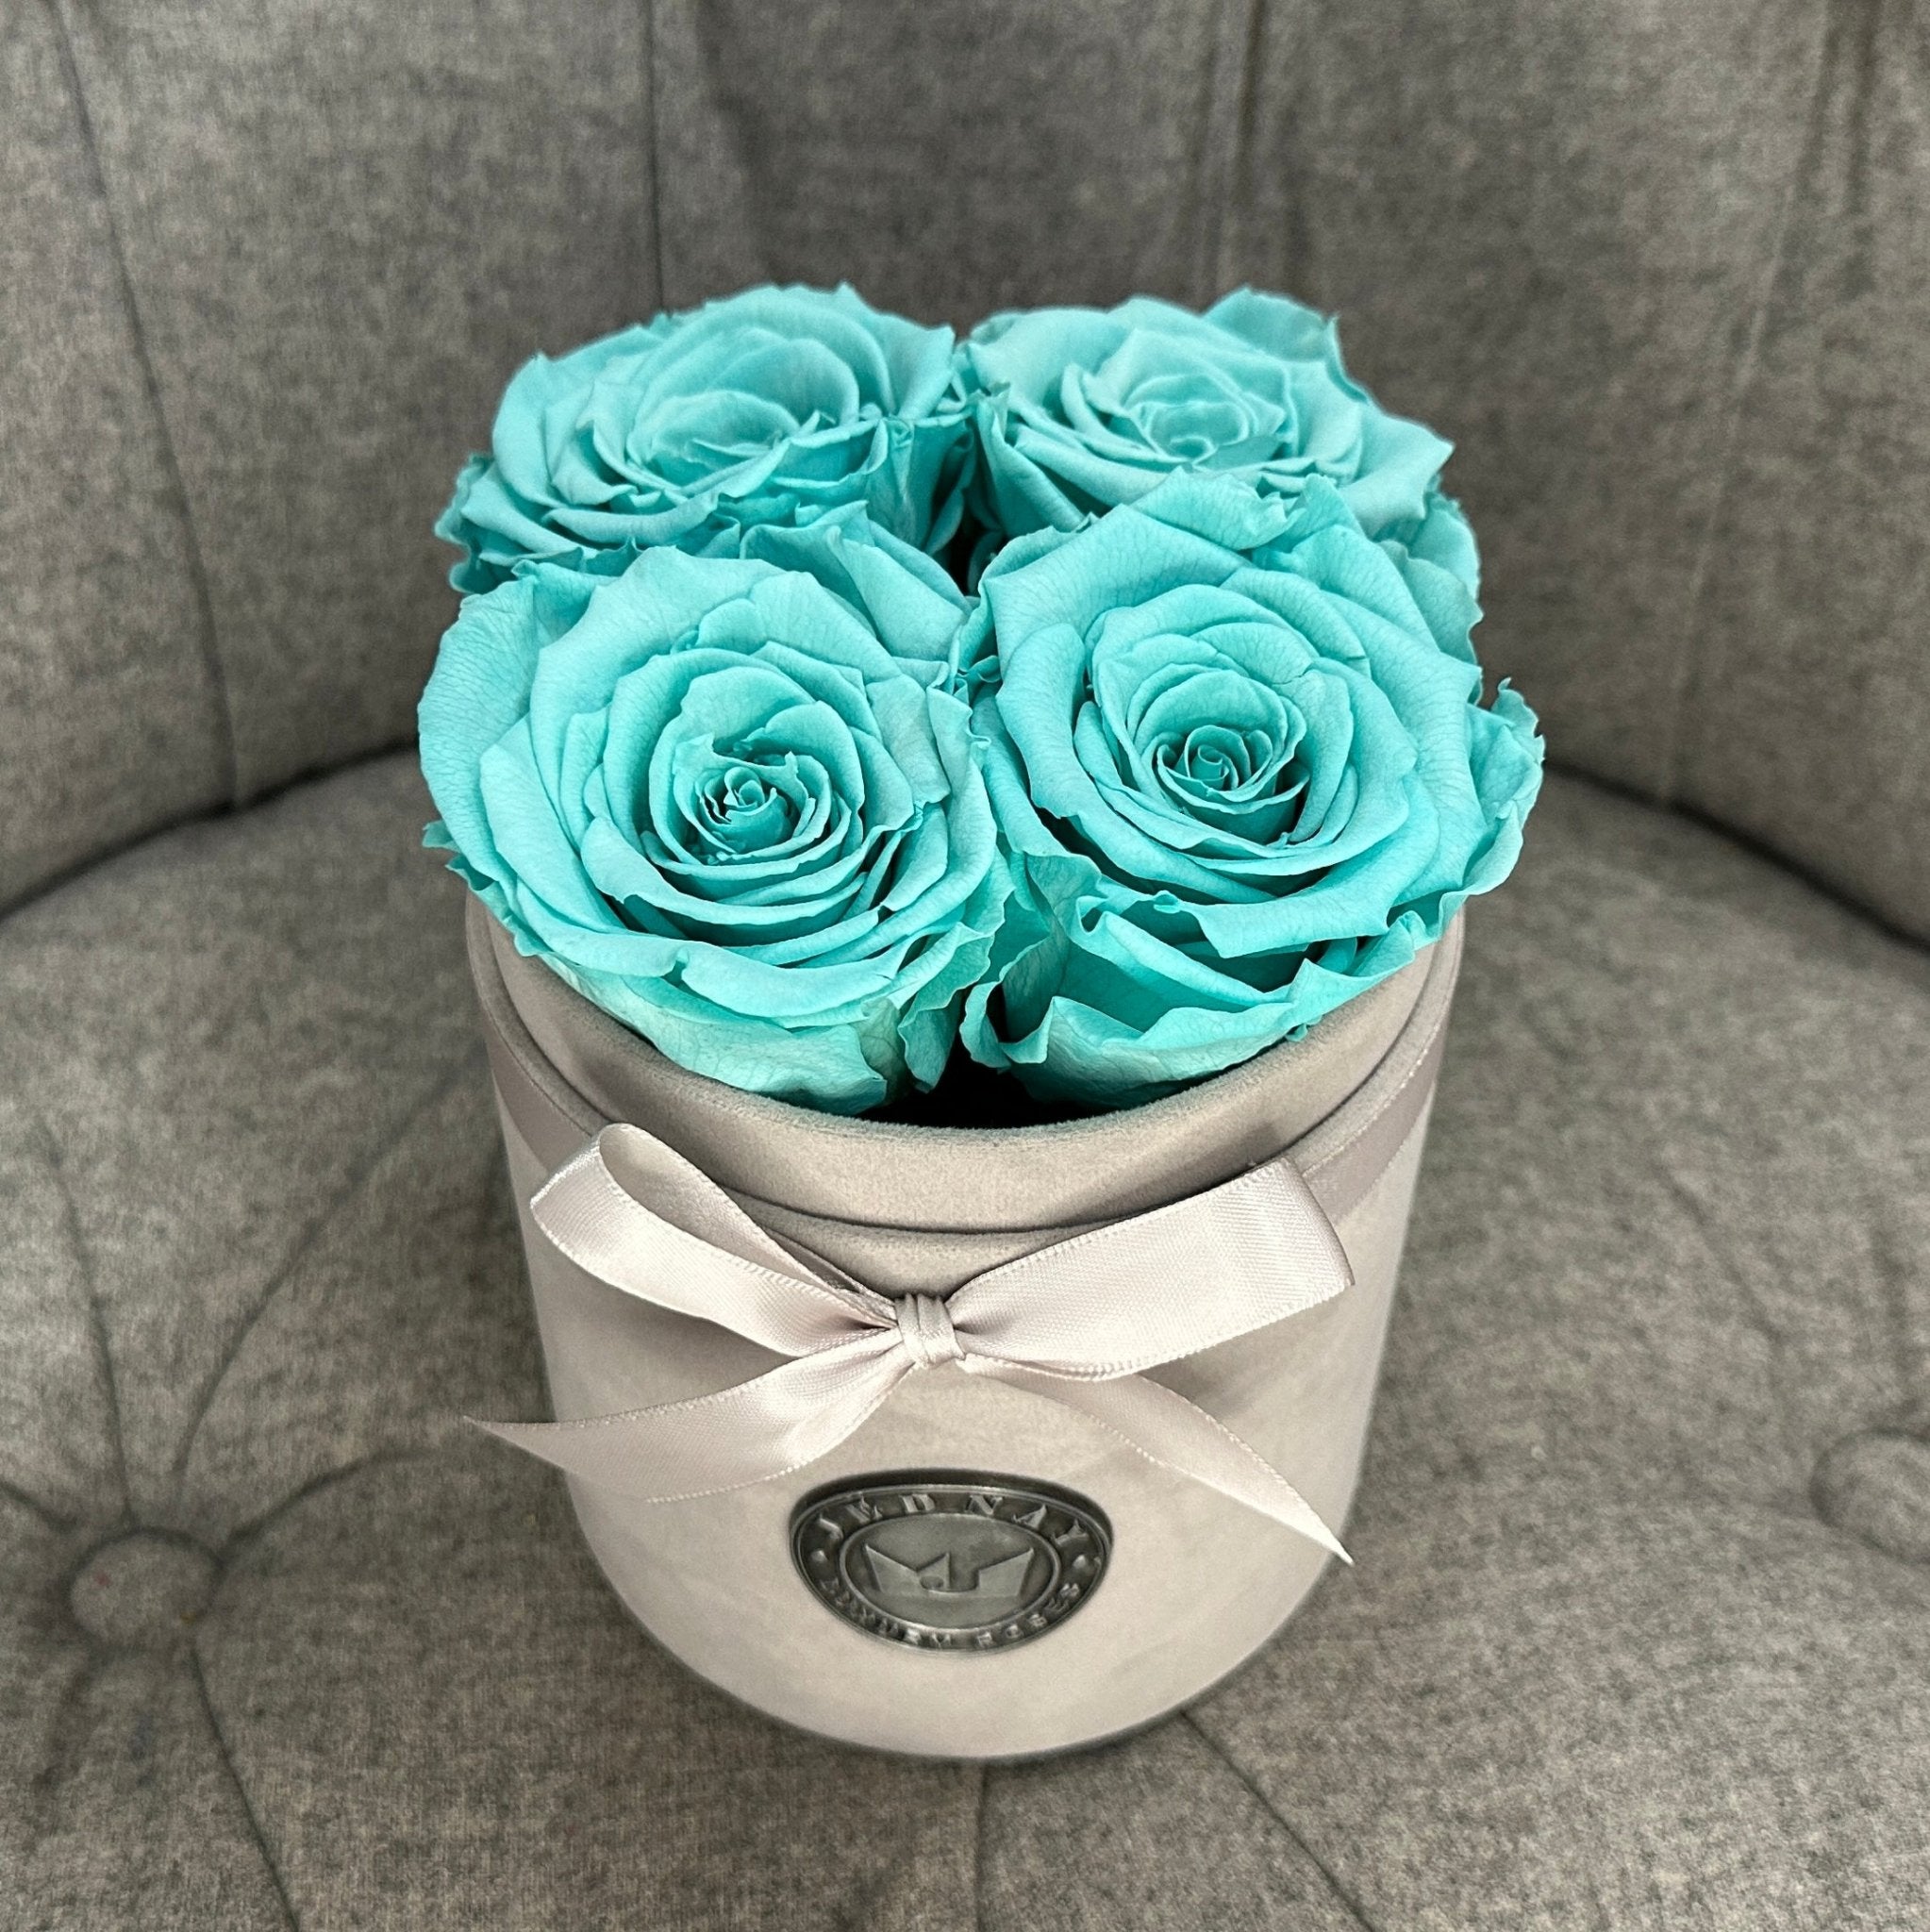 Petite Grey Suede Forever Rose Box - Tiffany Blue Eternal Roses - Jednay Roses